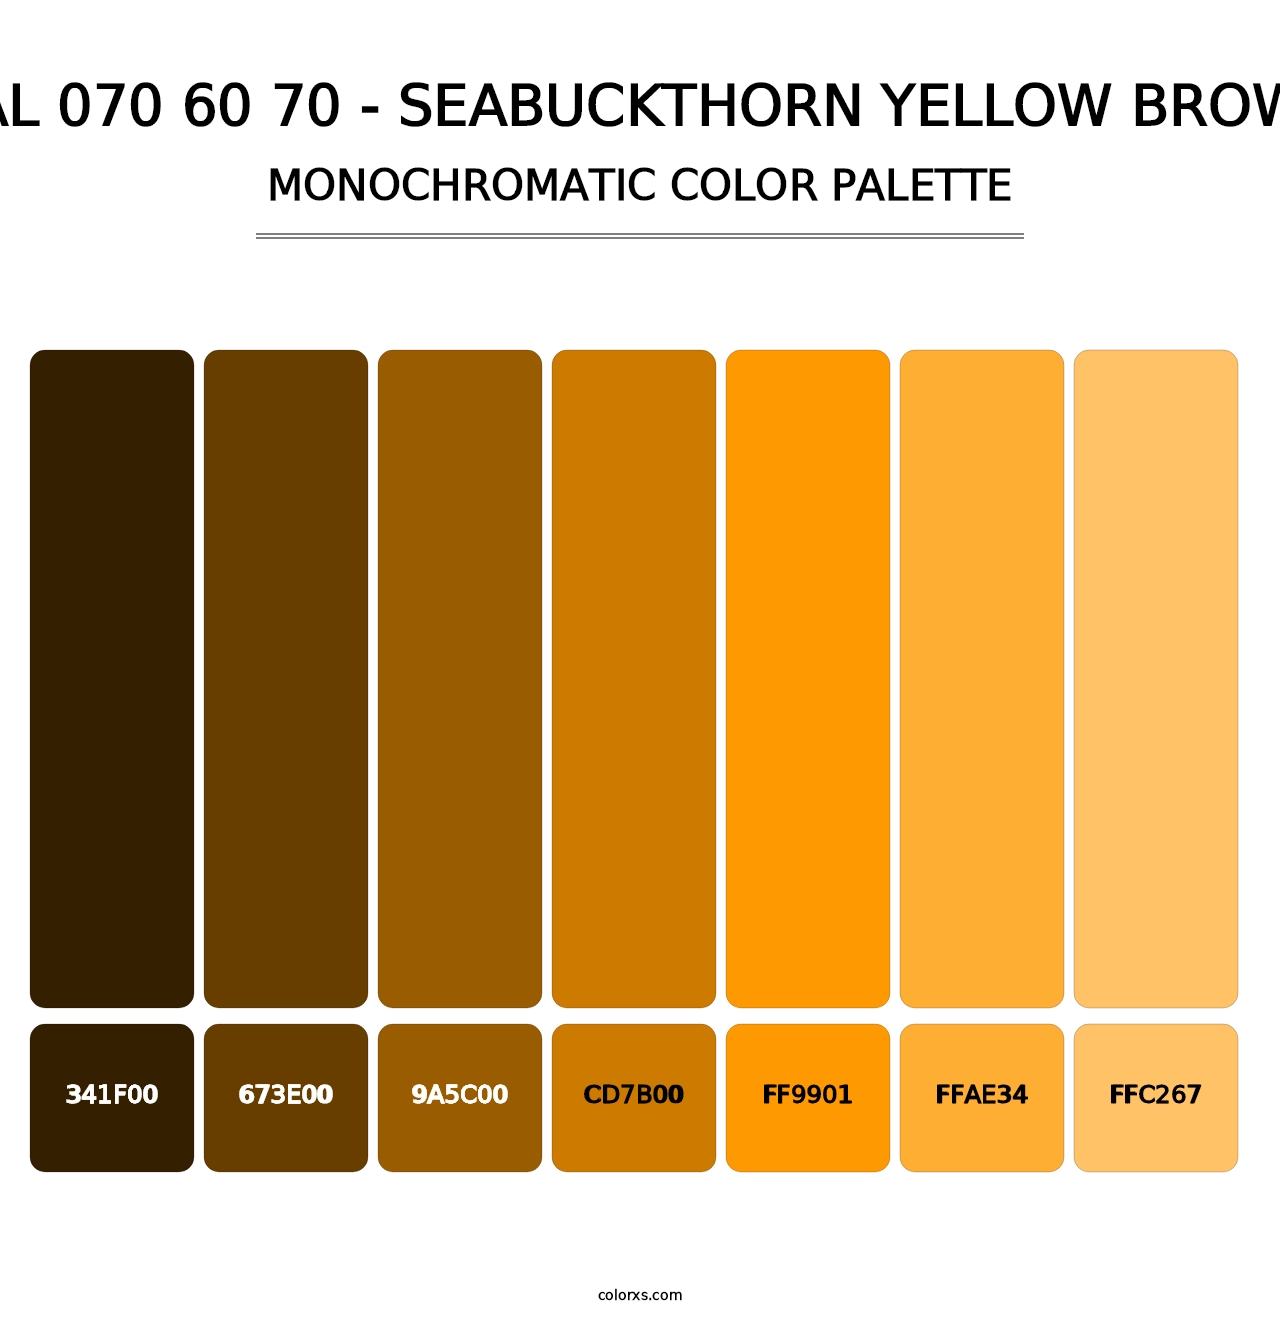 RAL 070 60 70 - Seabuckthorn Yellow Brown - Monochromatic Color Palette